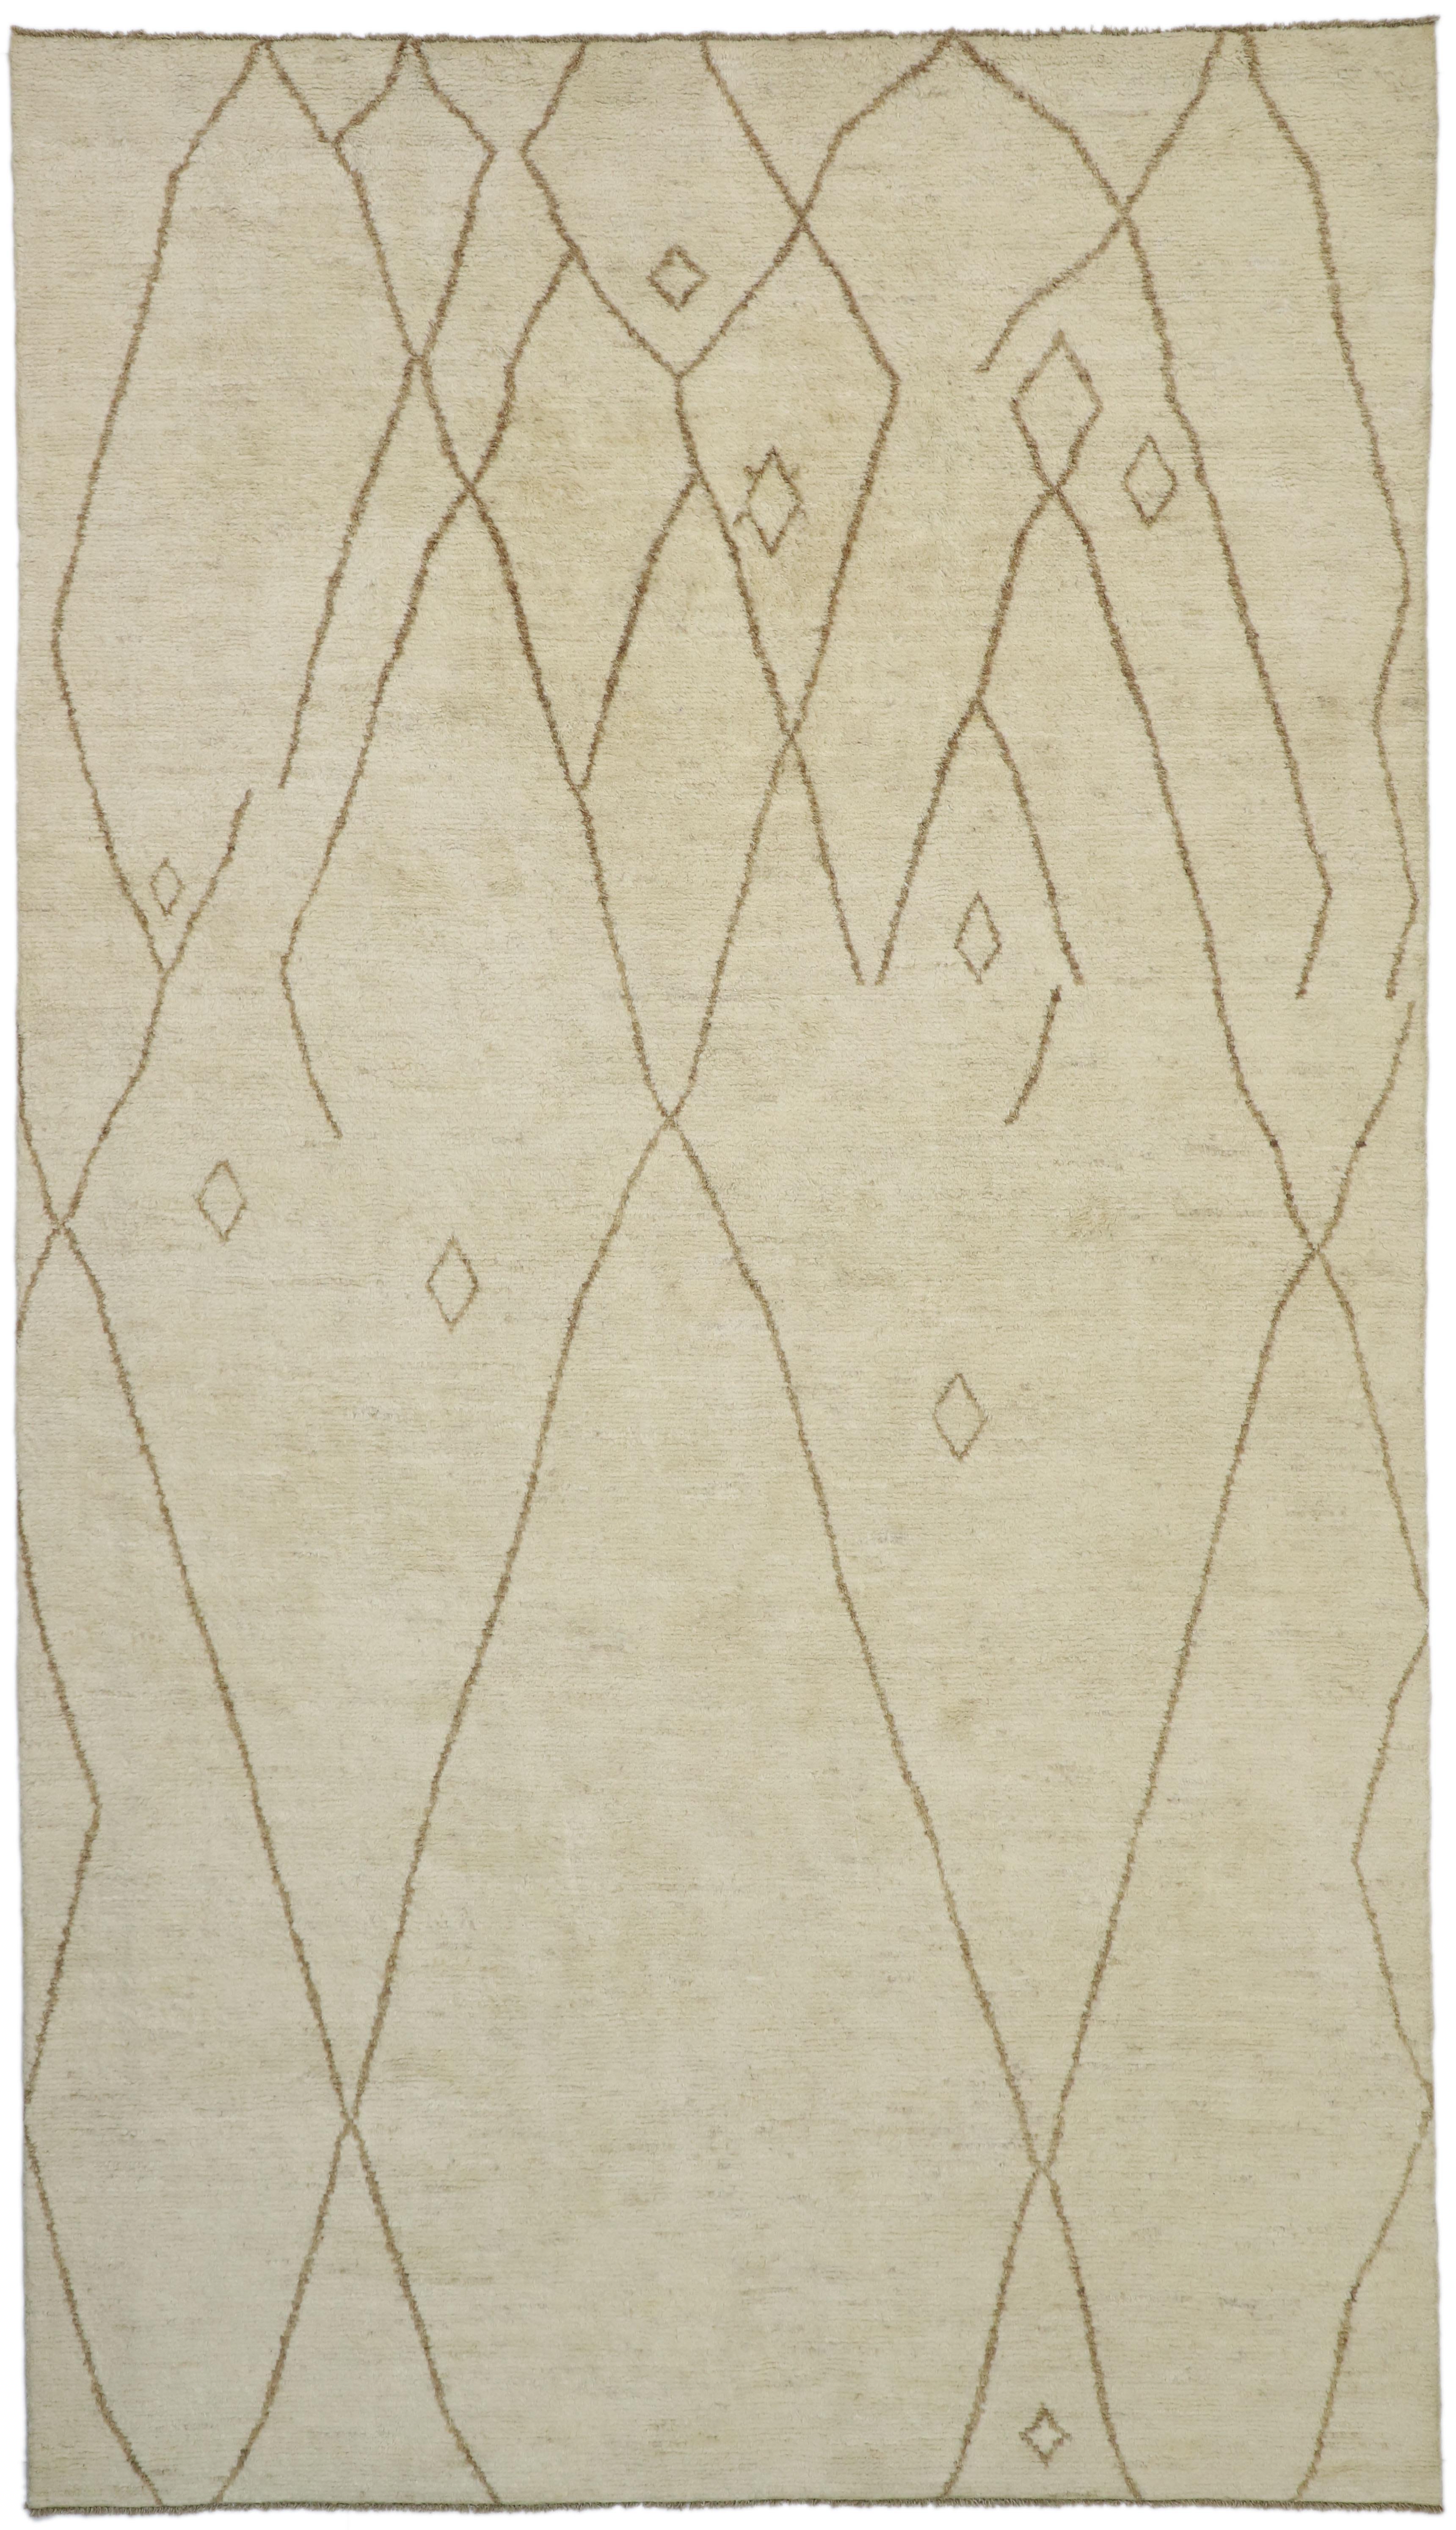 New Contemporary Moroccan Area Rug with Nomadic and Minimalist Style 1